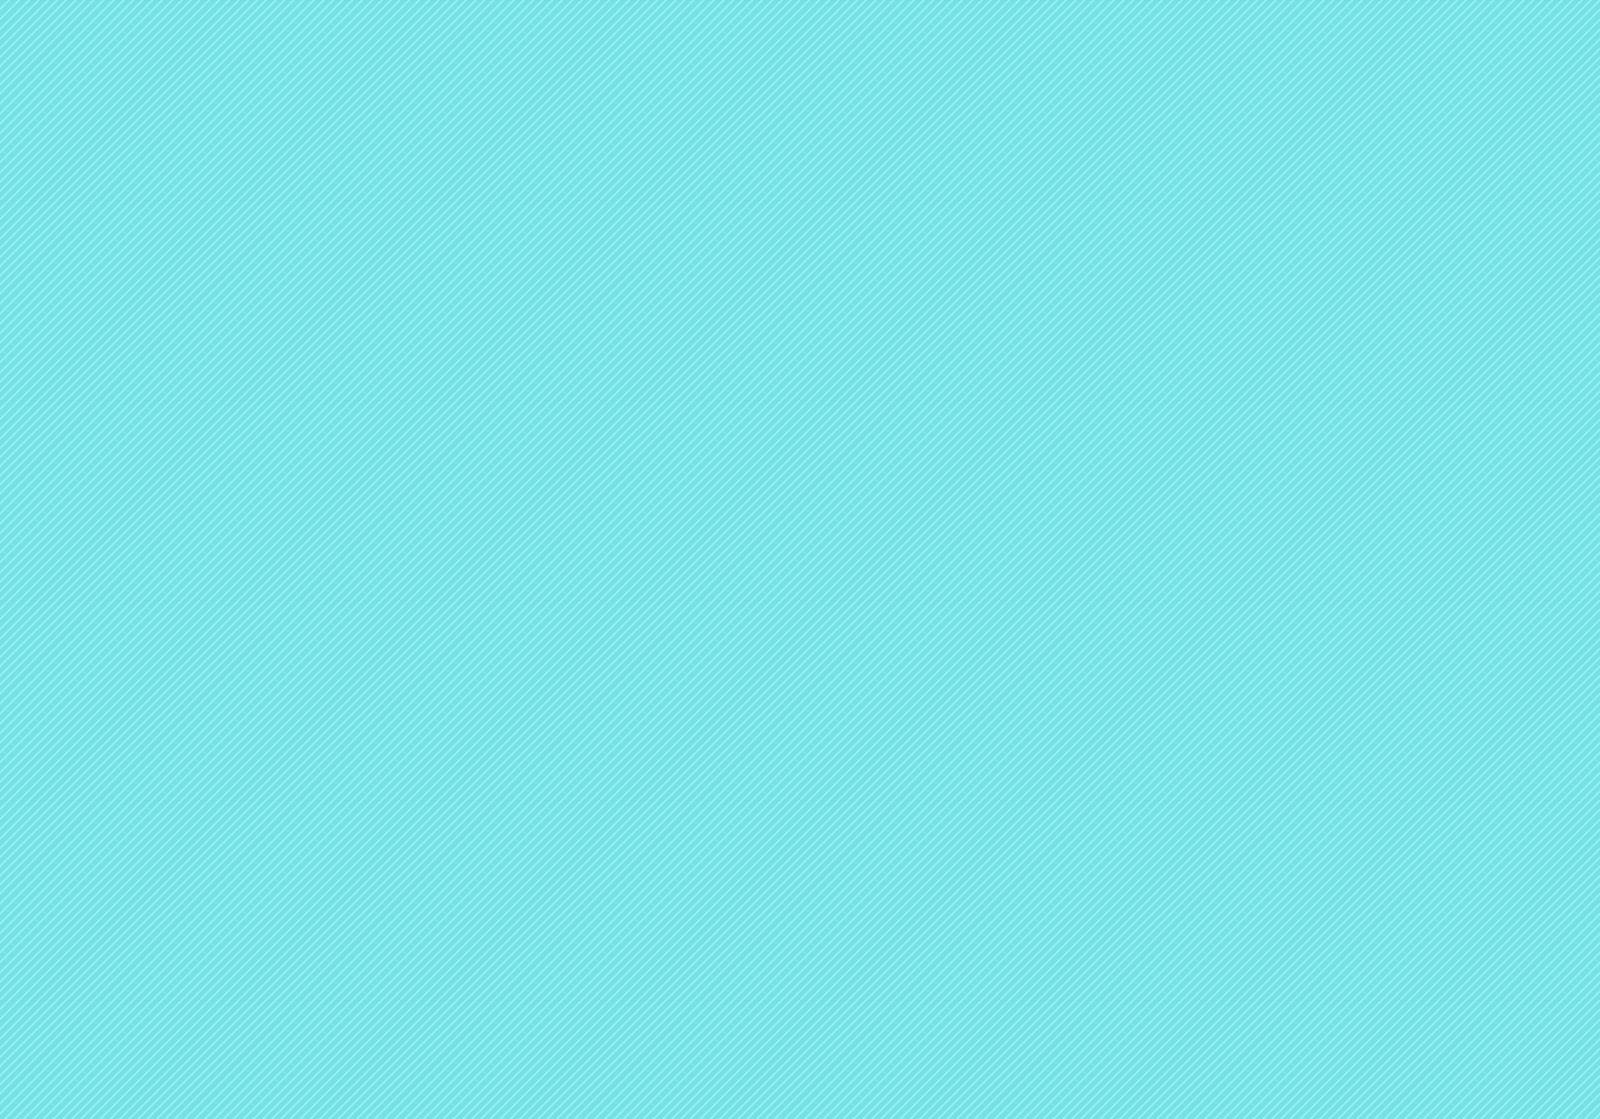 light teal background 11. Background Check All